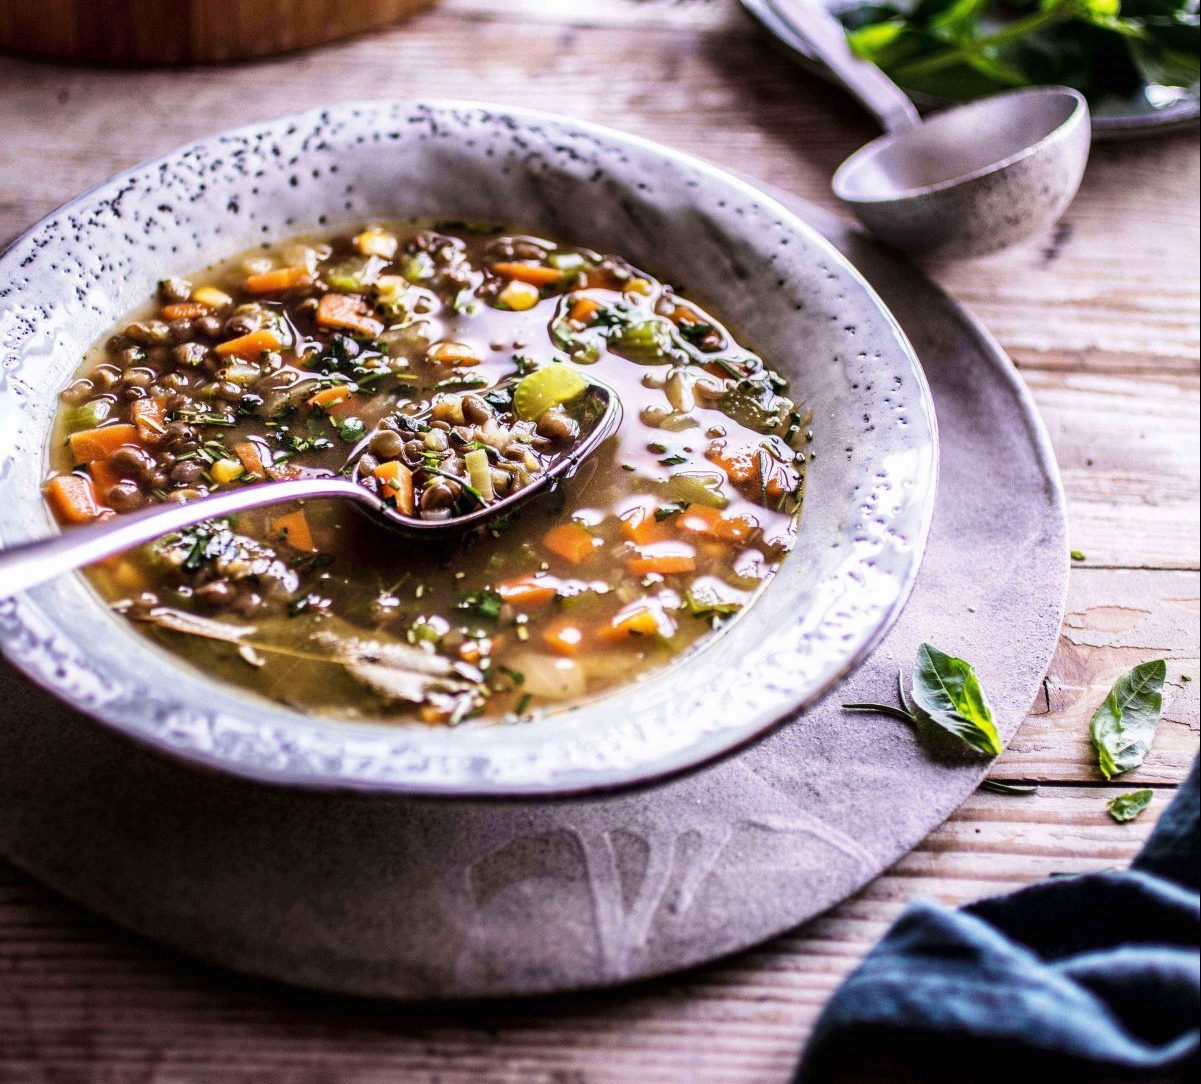 https://yummyplants.com/wp-content/uploads/2018/11/hearty-lentil-soup-with-fresh-herbs_WEB1-e1586972066162.jpg